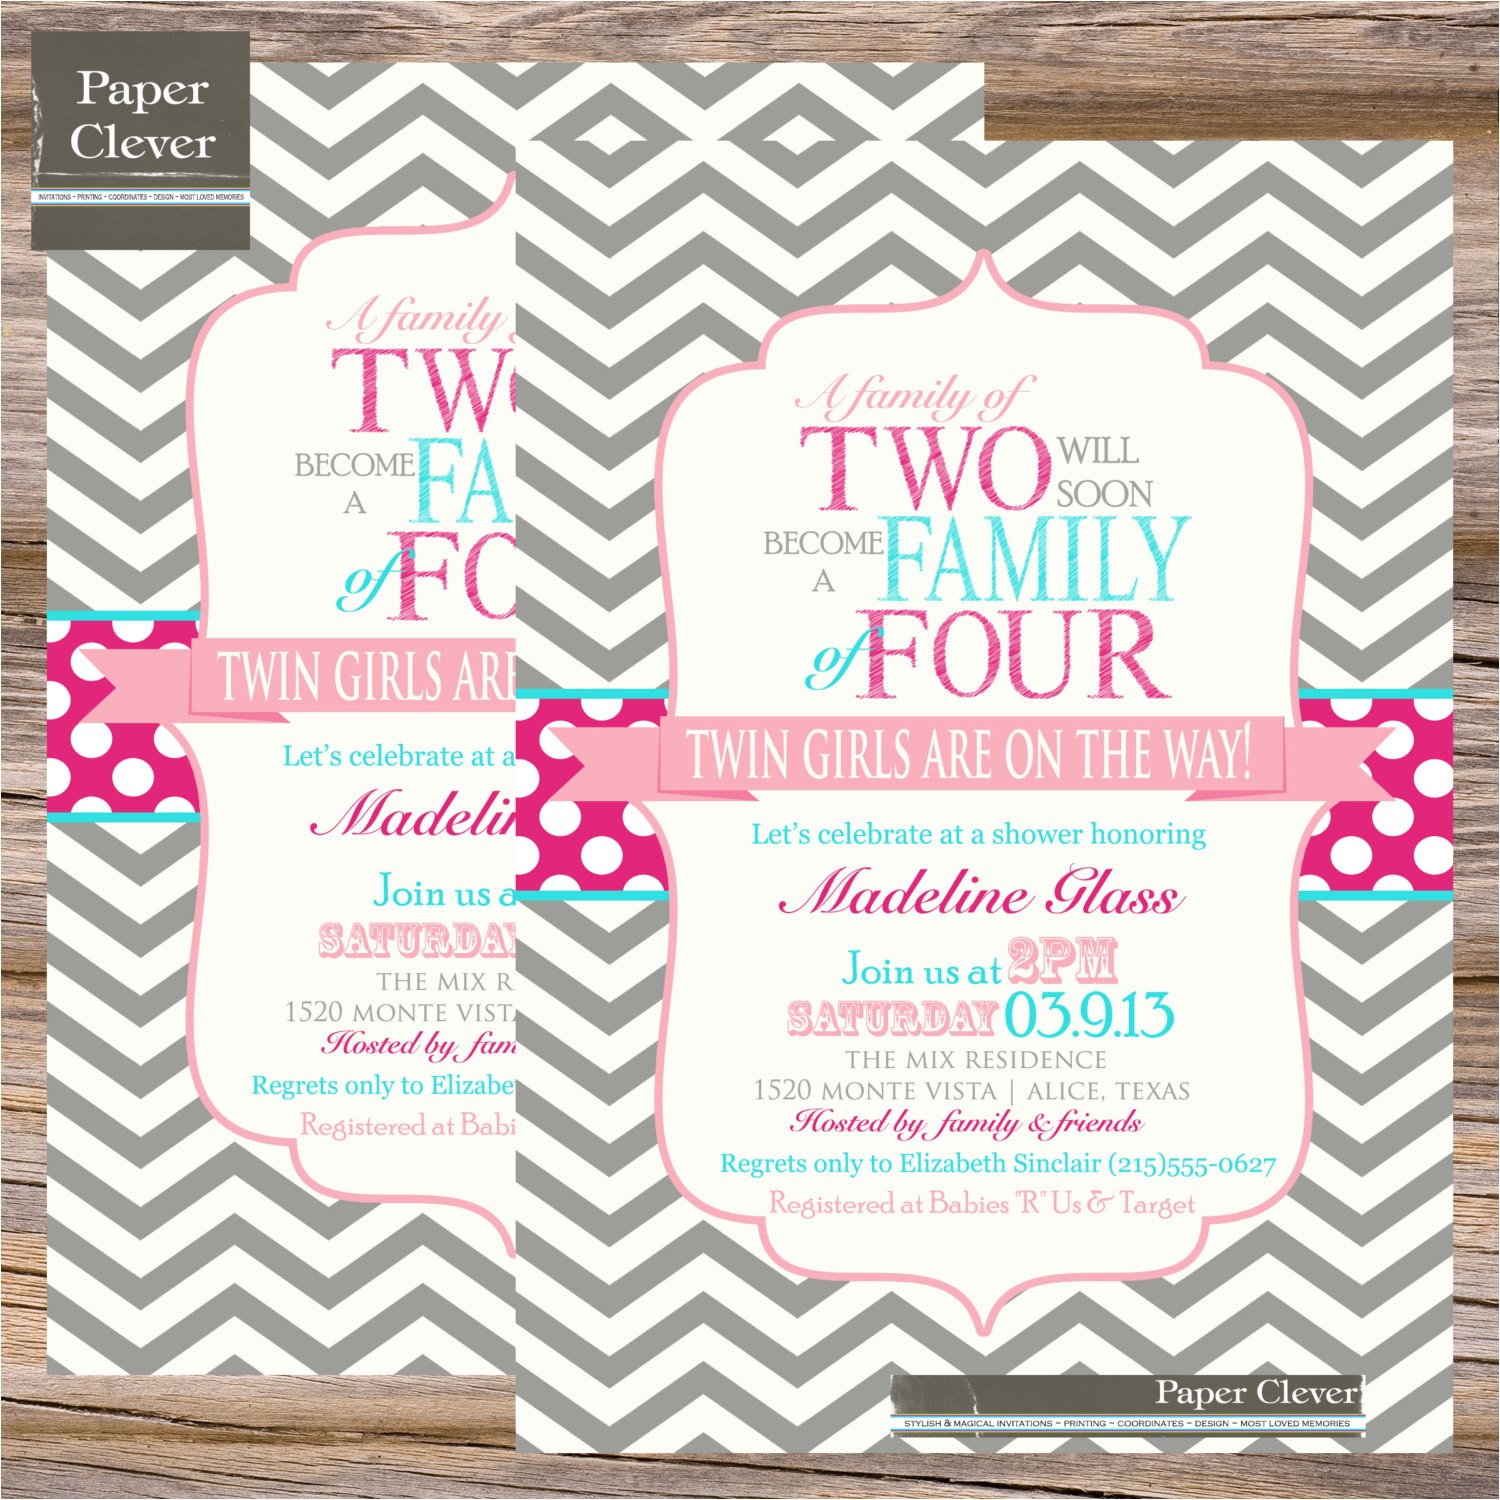 dr seuss baby shower invitations printable free